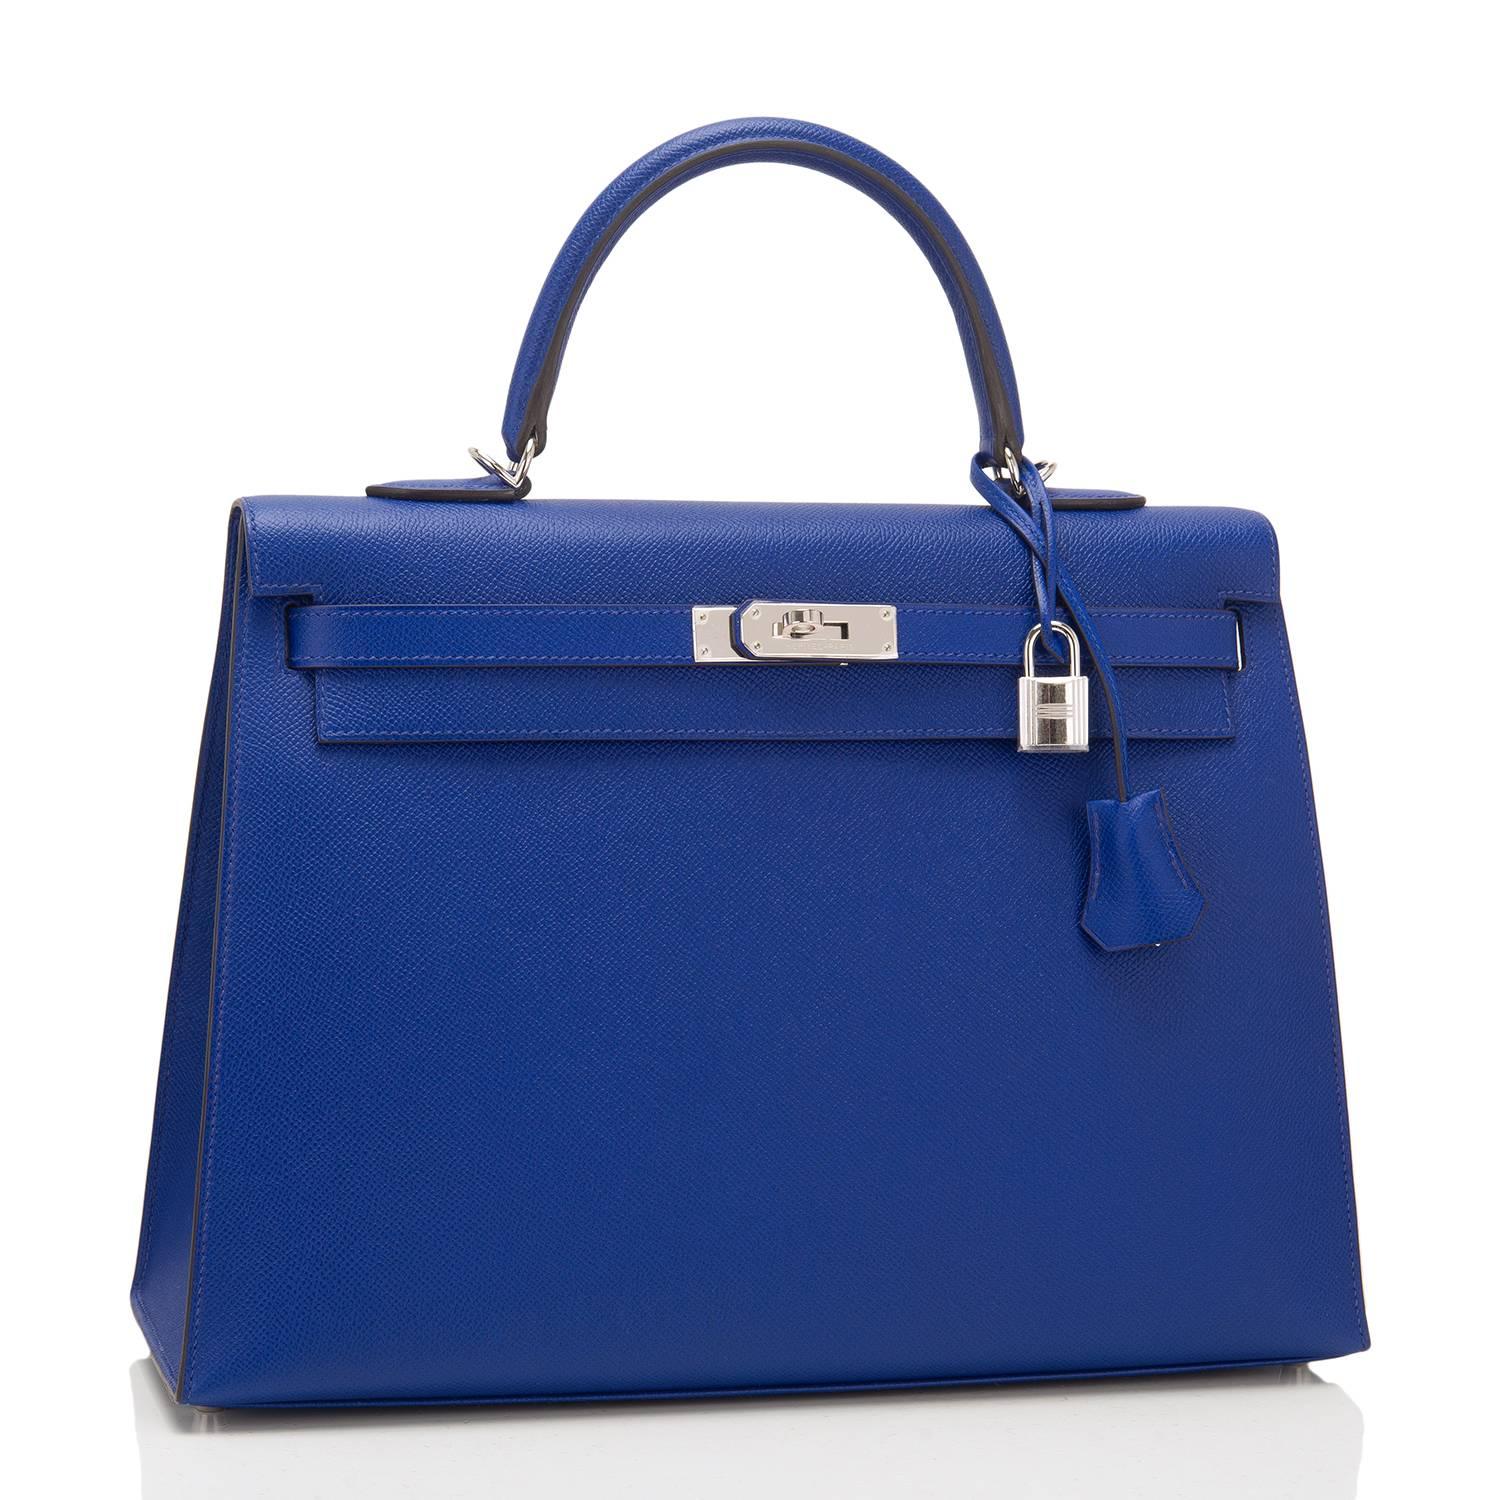 Hermes Blue Electric Kelly 35cm of epsom leather with palladium hardware.

This Kelly, in the sellier style, has tonal stitching, a front toggle closure, a clochette with lock and two keys, a single rolled handle, and a removable shoulder